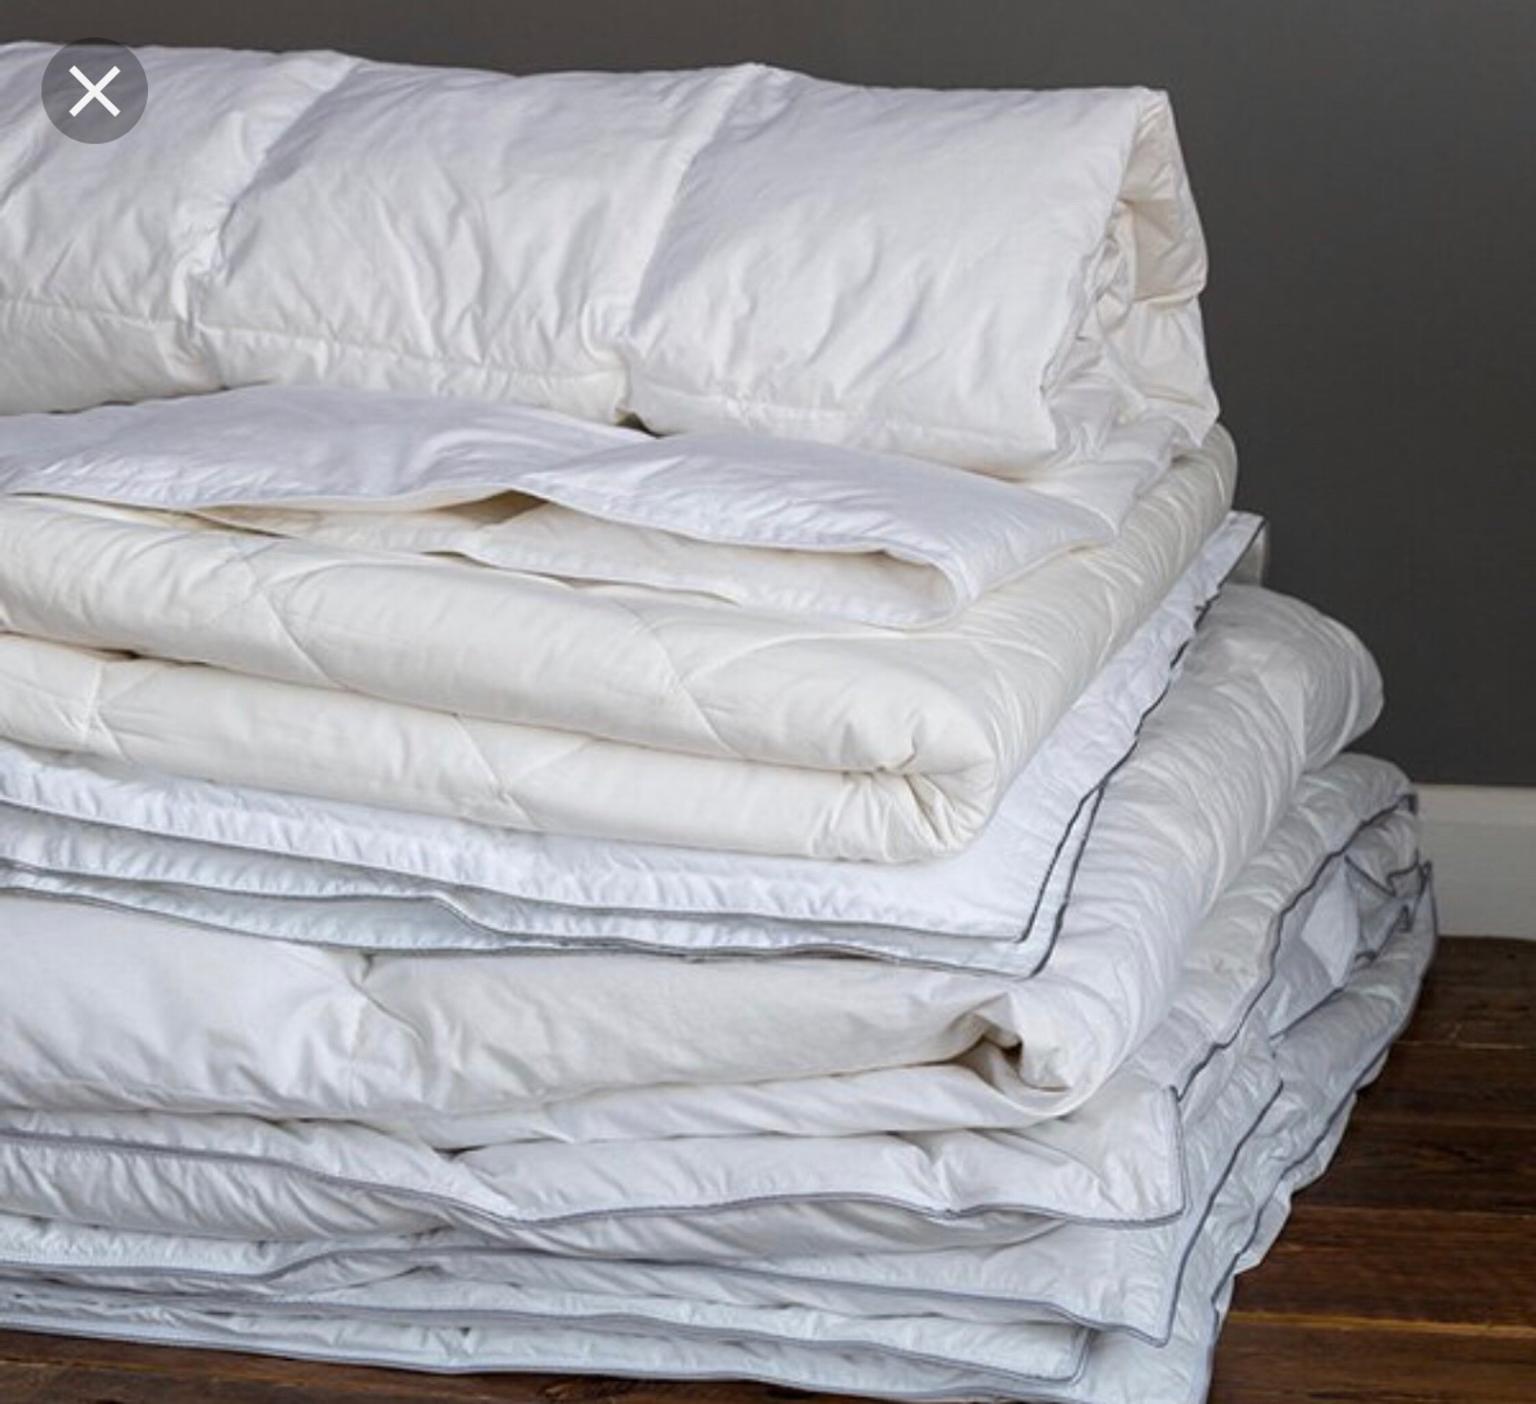 Free Feather And Synthetic Duvets Dry Clean In Kt2 Thames For